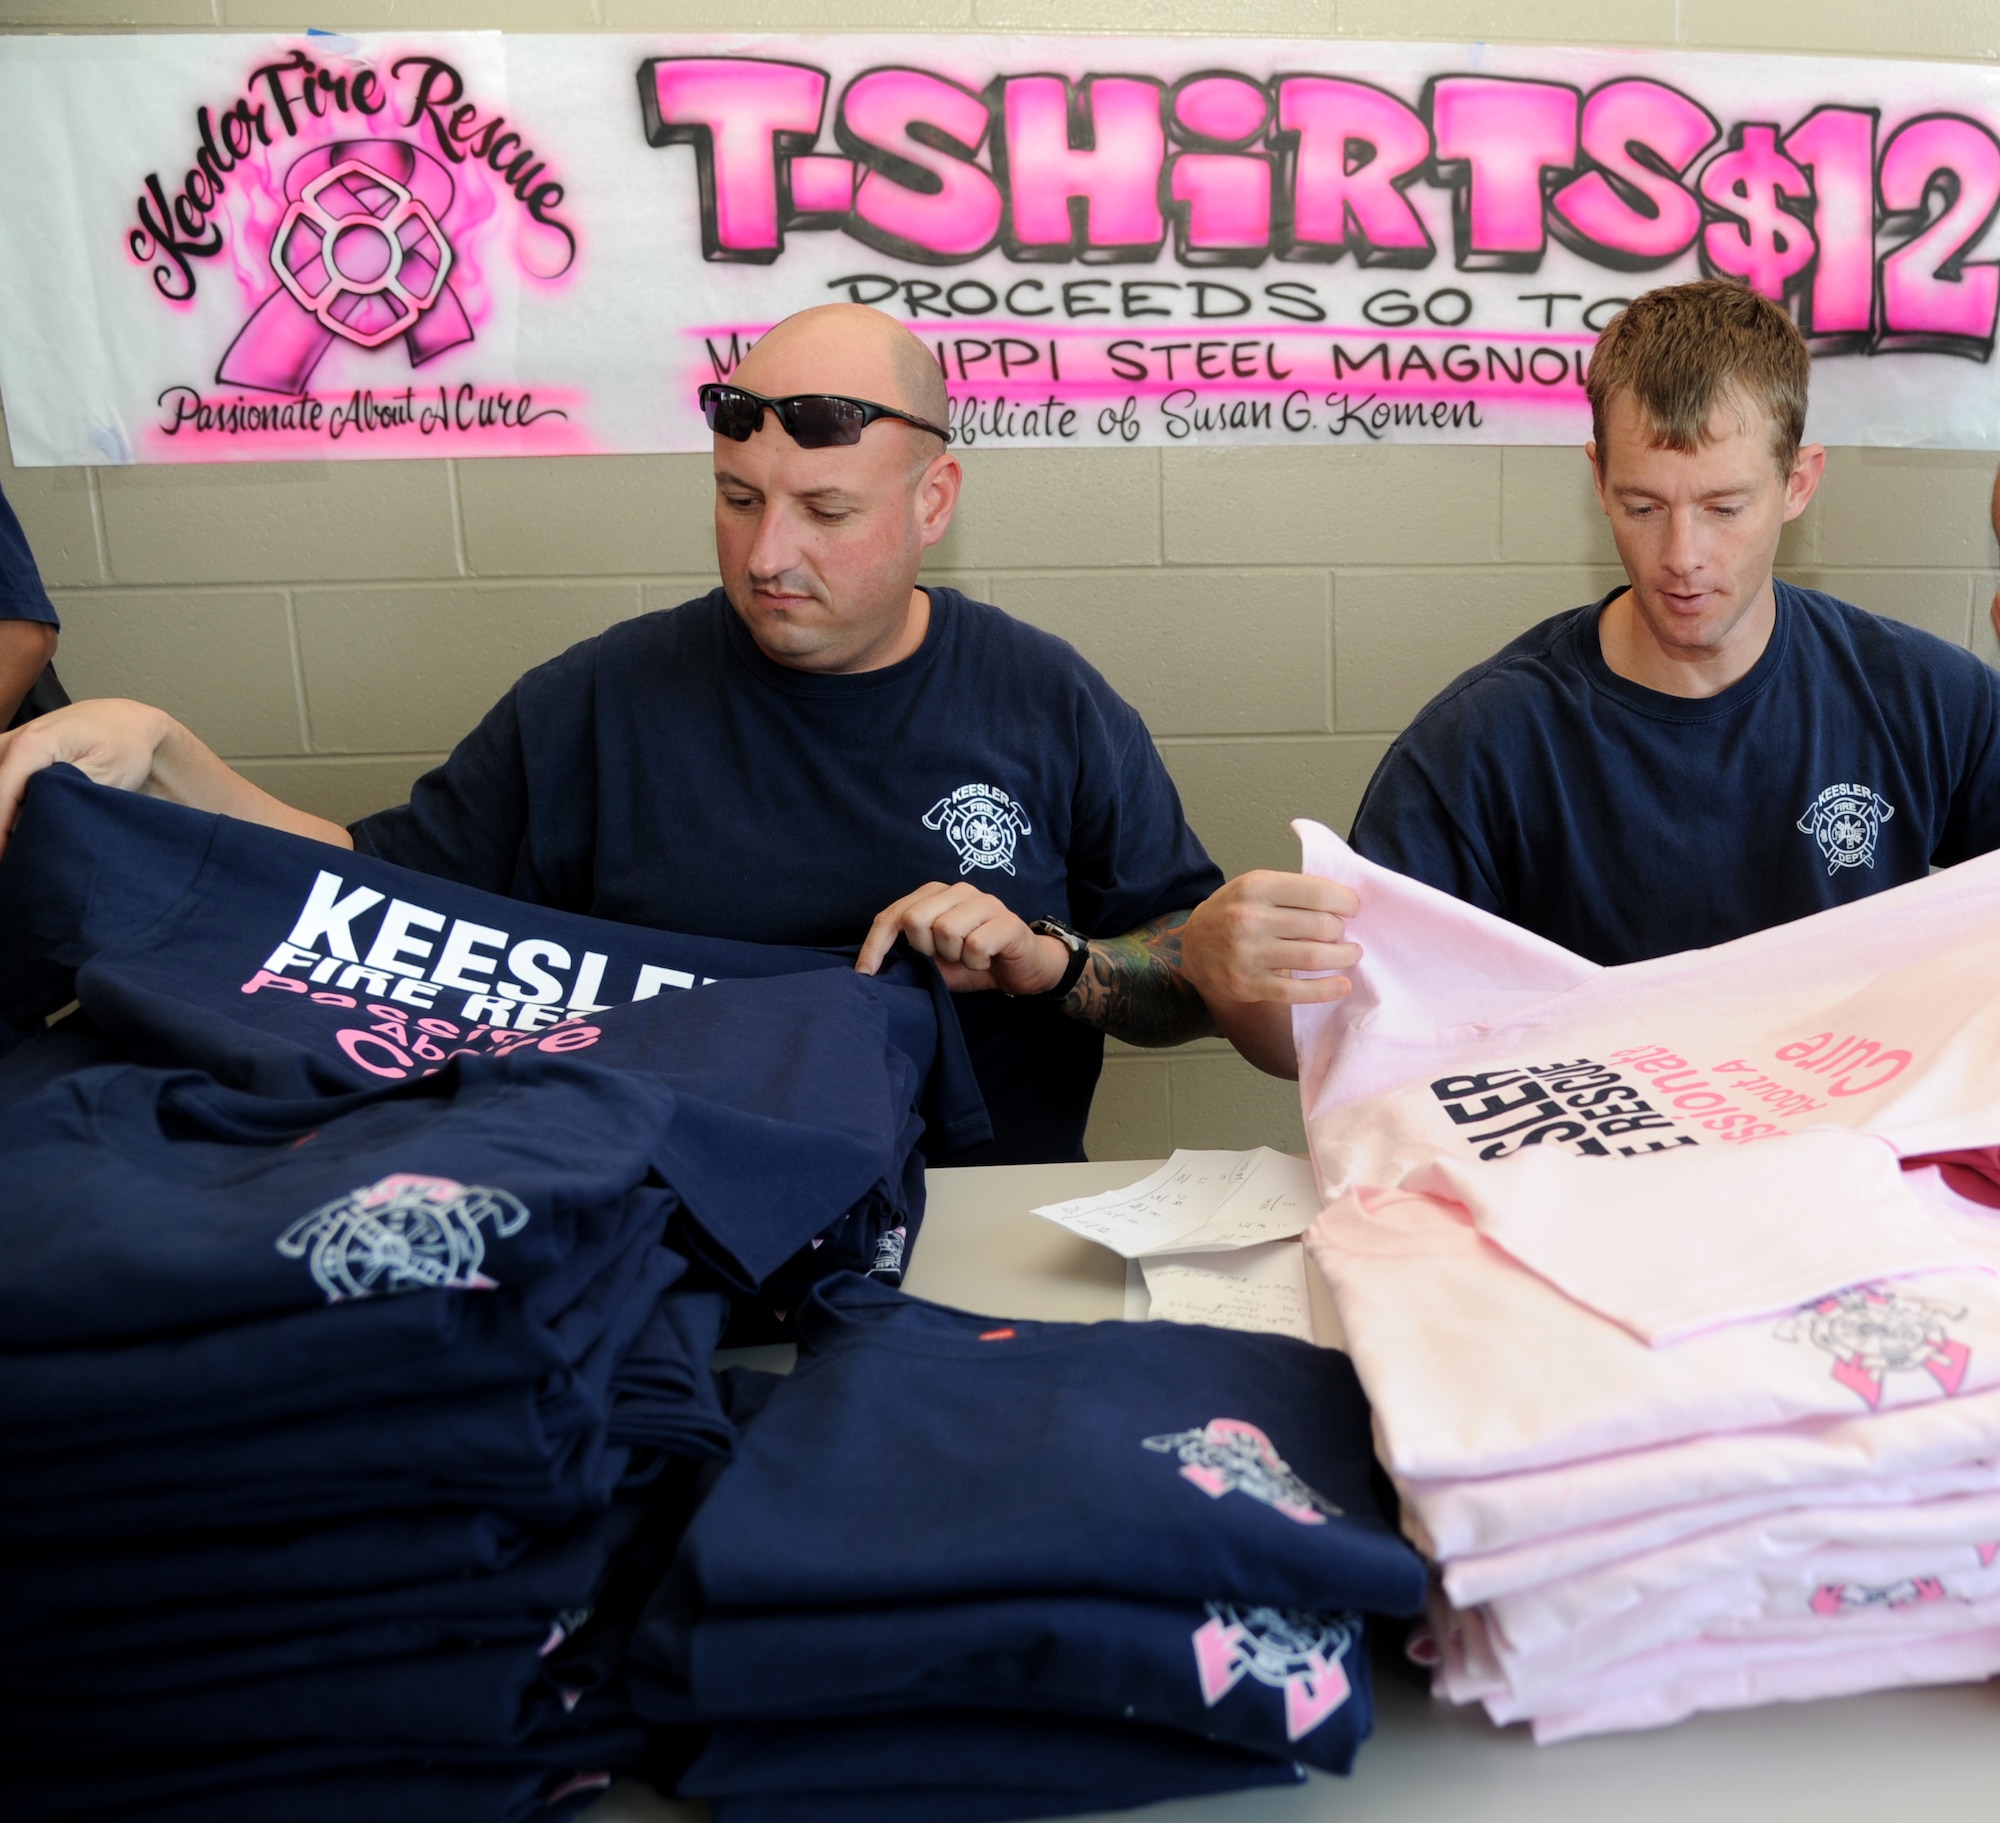 James Tate and Jason Wallace, Keesler firefighters, sort breast cancer awareness T-shirts to sell by the Keesler Fire Department during the department’s open house Oct. 13, 2012, Keesler Air Force Base, Miss.  The event was held on the final day of fire prevention week during which the fire department conducted random fire drills throughout the base, toured various facilities with Sparky the Fire Dog, passed out fire safety handouts and fire hats for children and provided stove and fire extinguisher demonstrations.  (U.S. Air Force photo by Kemberly Groue)